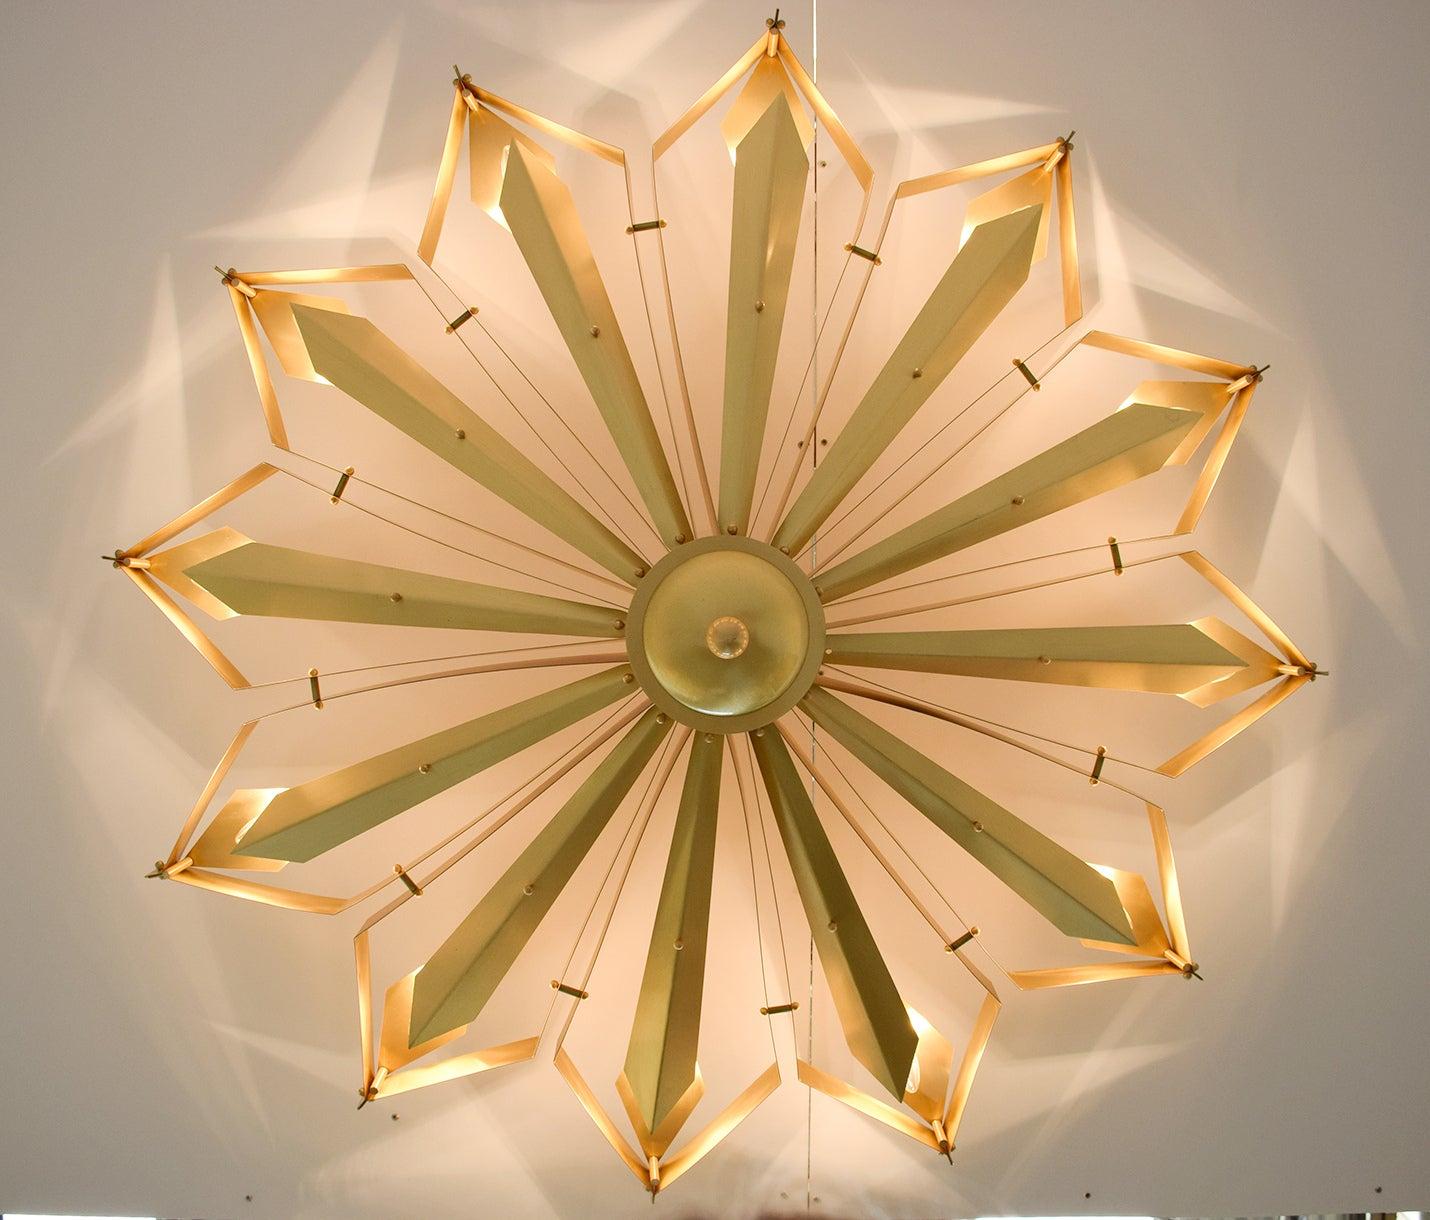 Elegant Italian flushmount with satin brass frame handcrafted to resemble a convex dahlia flower, designed by Fabio Bergomi for Fabio Ltd / Made in Italy
12 lights / E12 or E14 type / max 40W each
Measures: Diameter 51 inches / Height 16